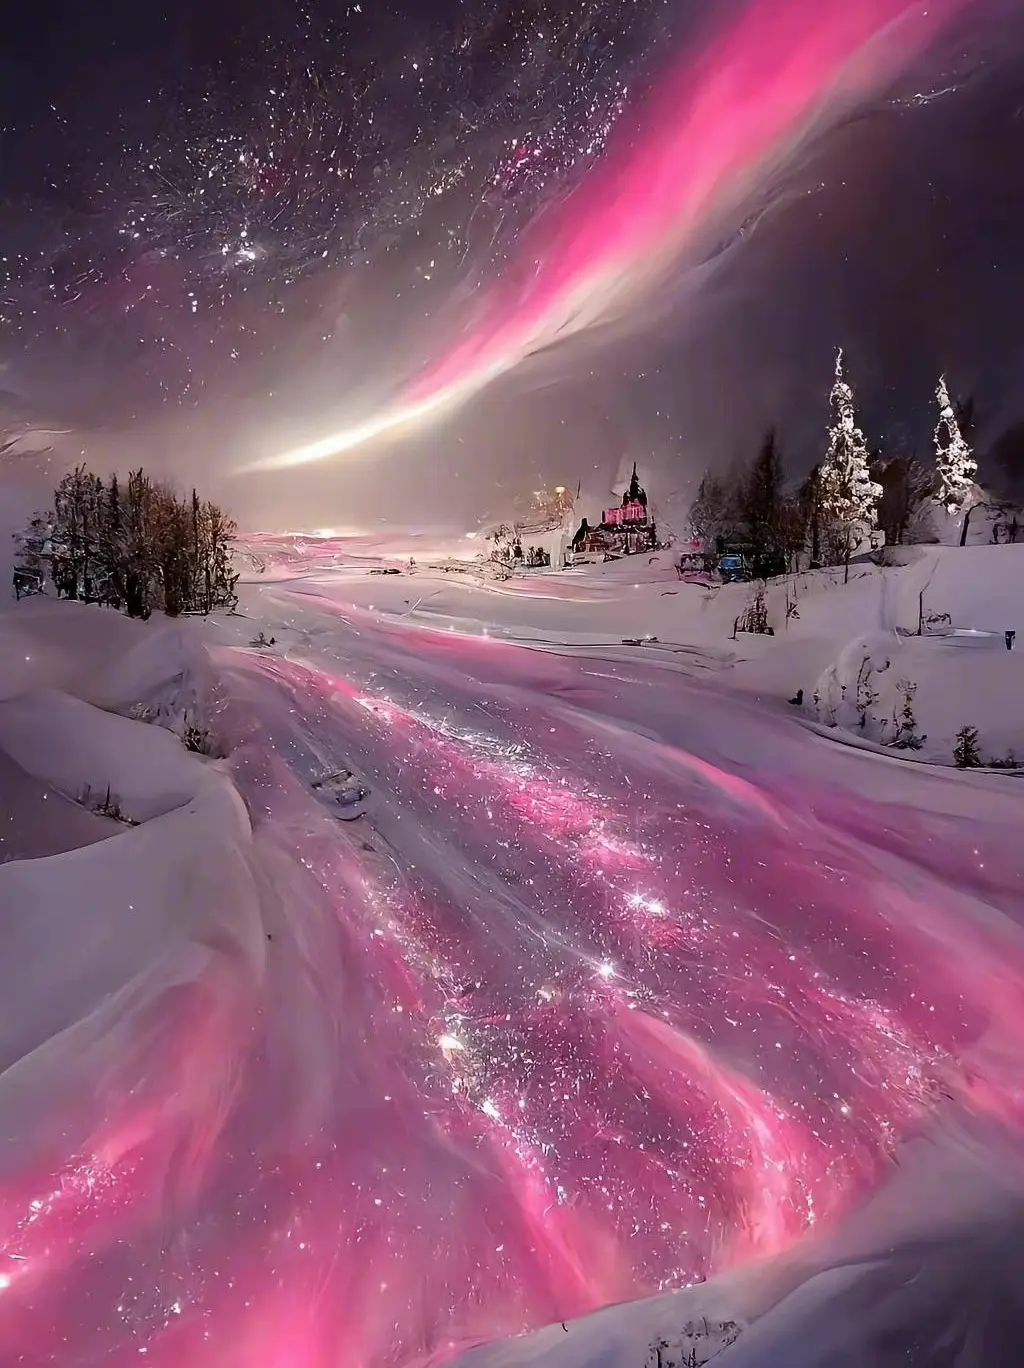 A stunning pink and white Northern Lights dance above a snowy landscape. - Winter